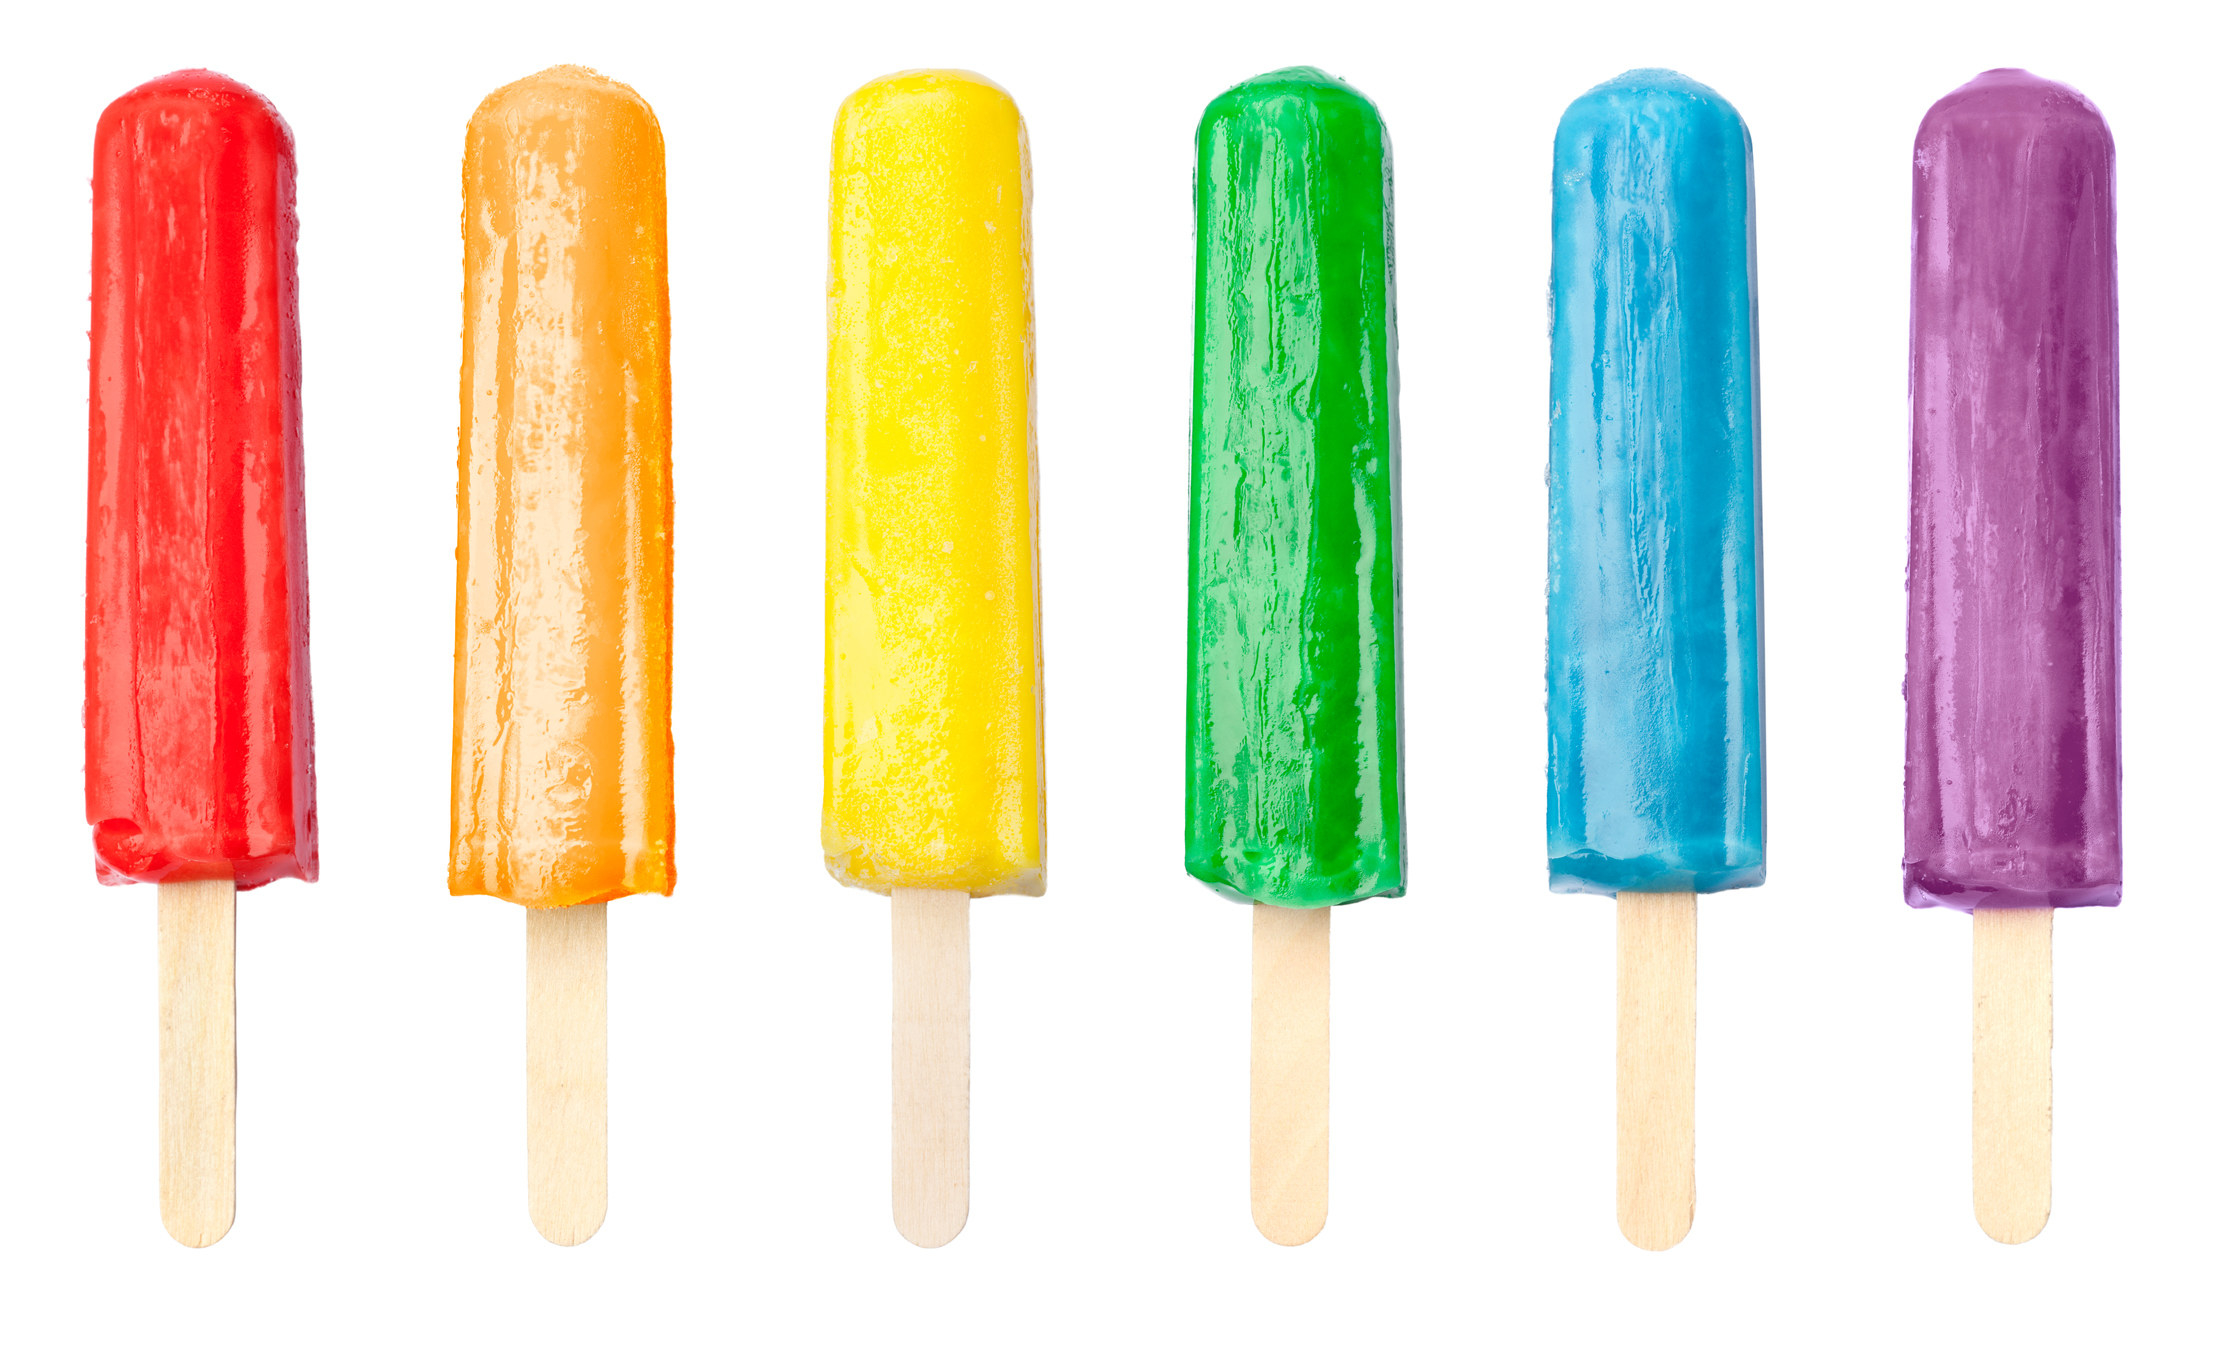 A row of popsicles